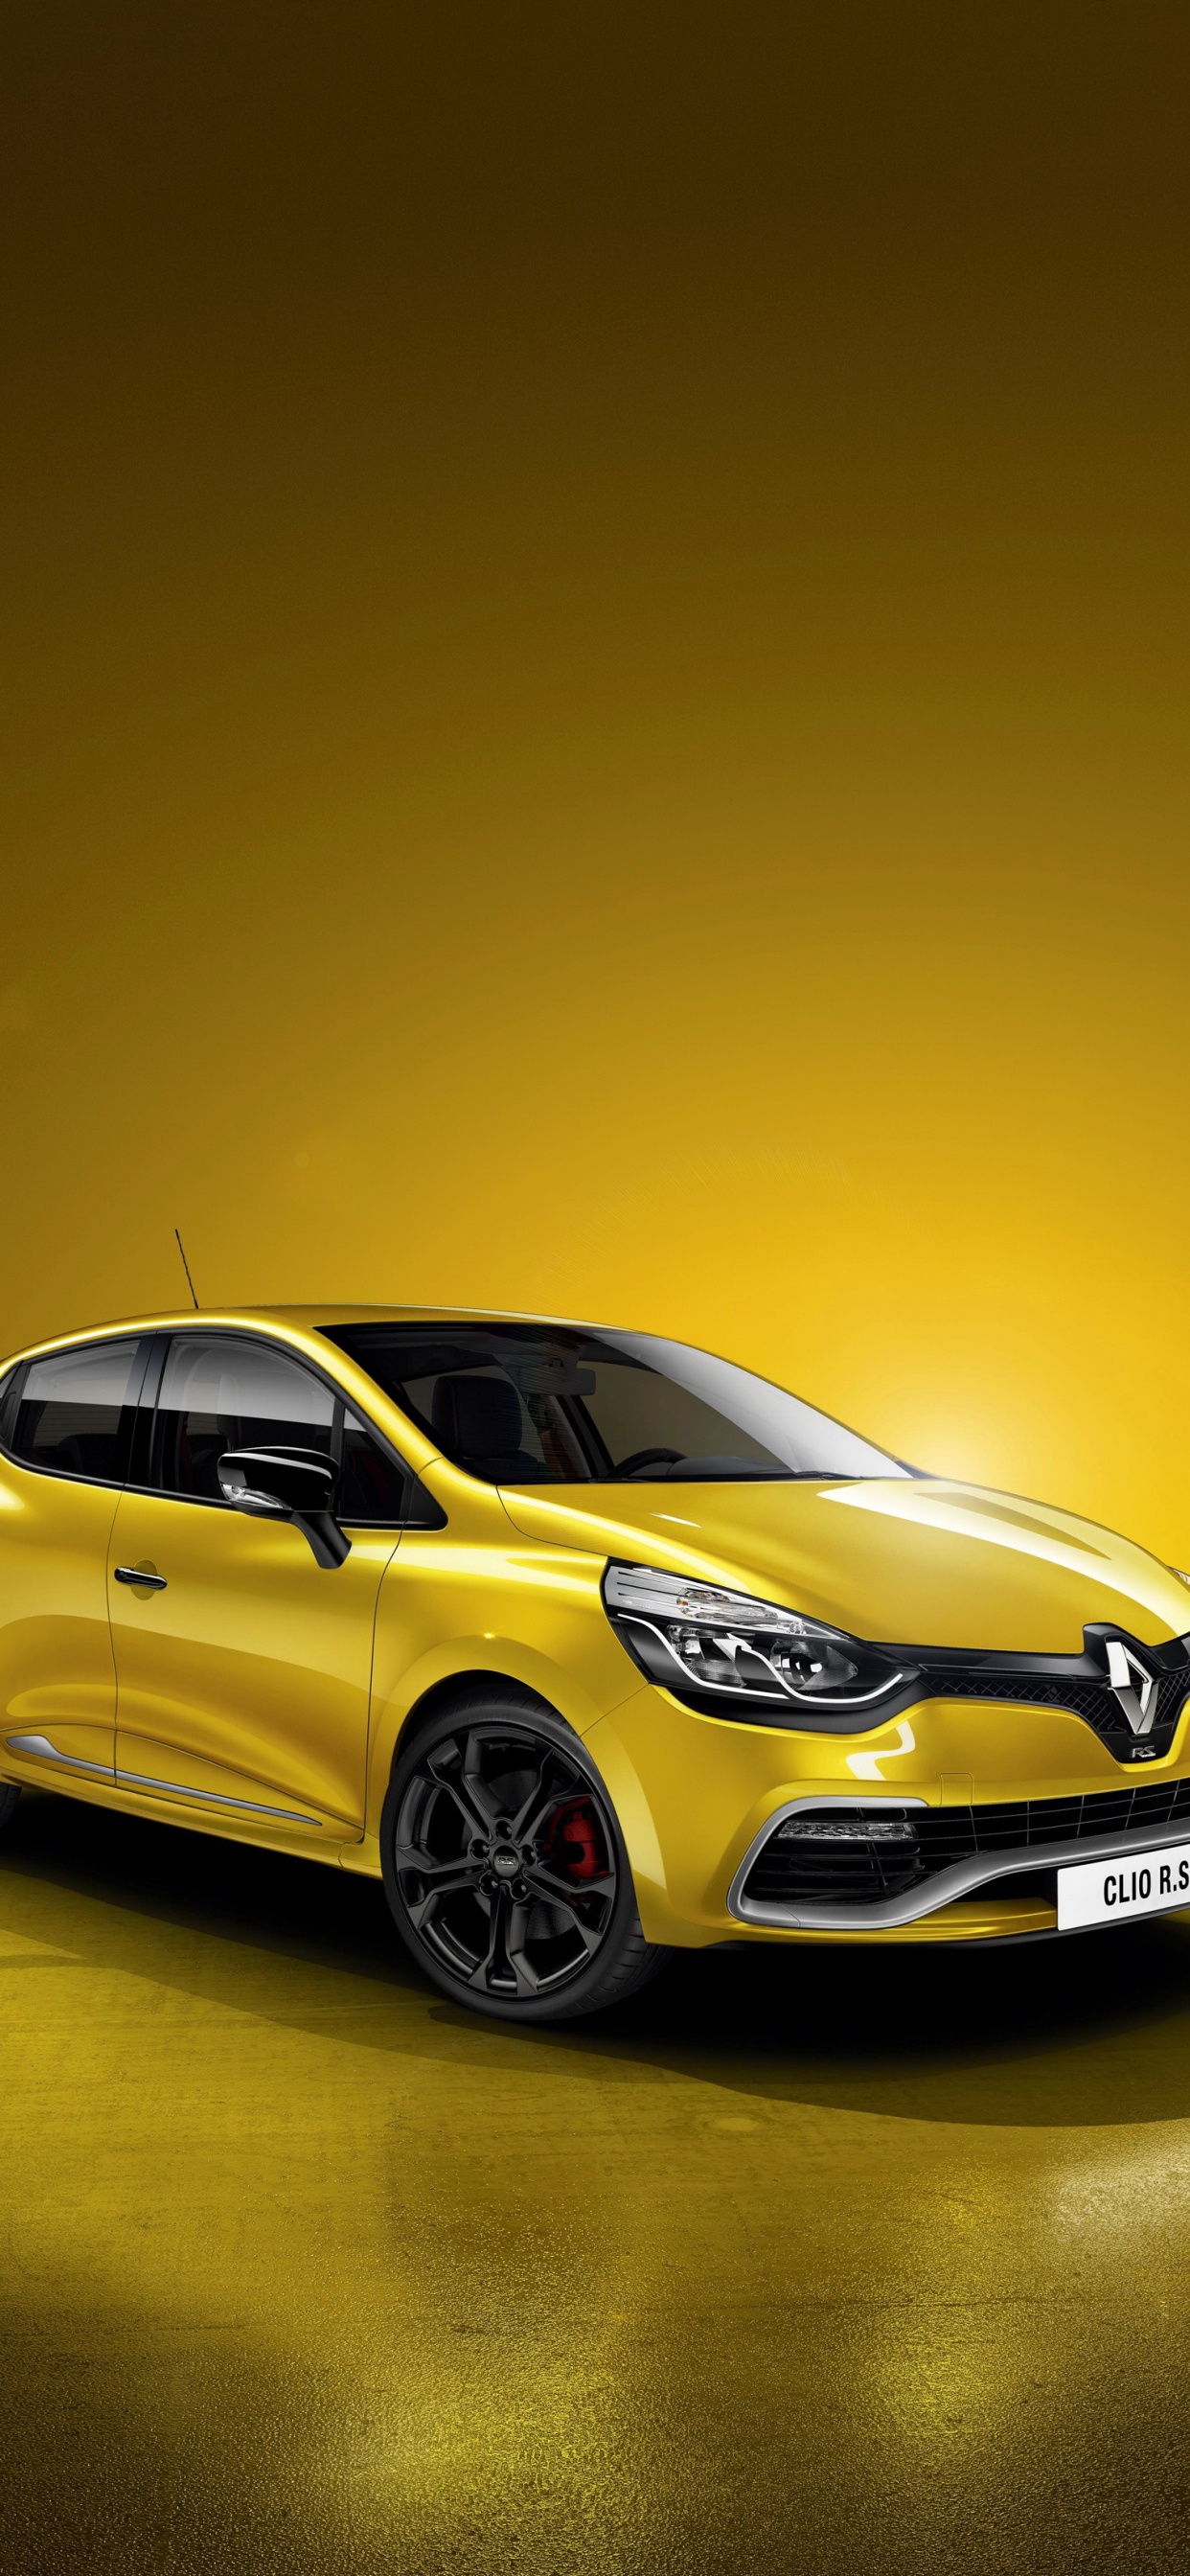 Yellow Mercedes Benz c Class Coupe. Wallpaper in 1242x2688 Resolution